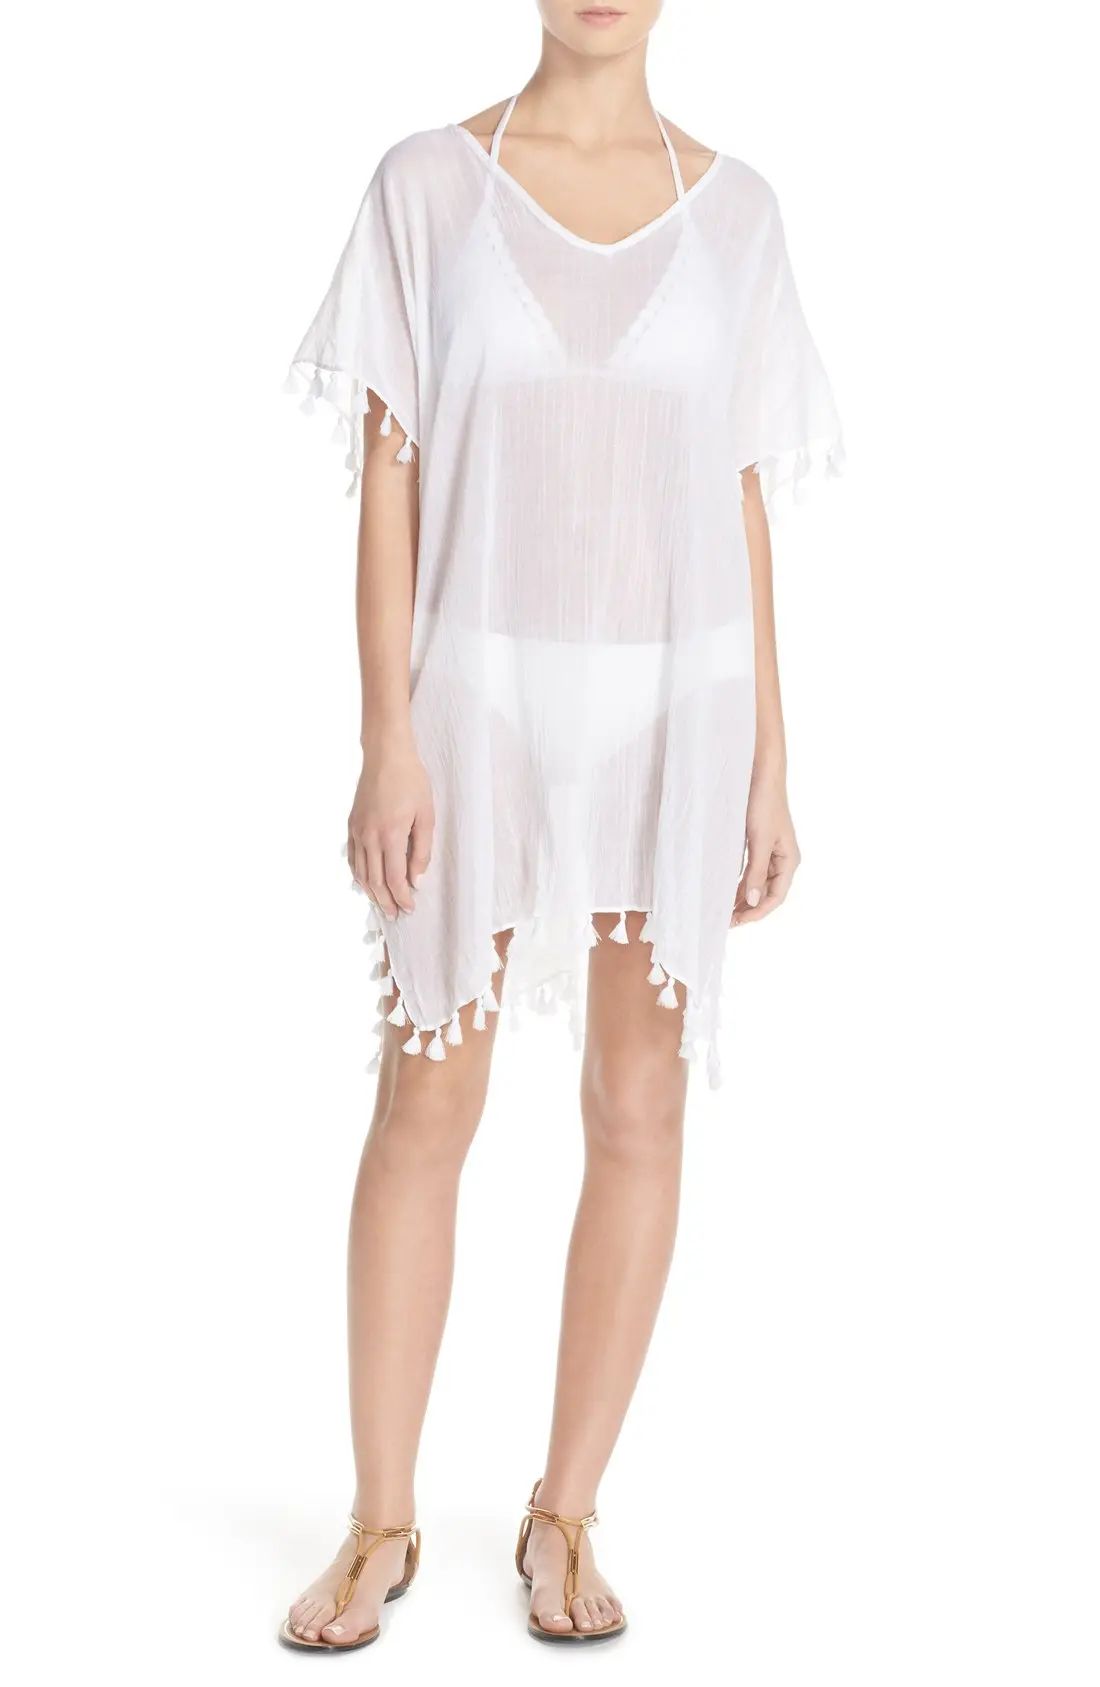 Women's Seafolly 'Amnesia' Cotton Gauze Cover-Up Caftan, Size One Size - White | Nordstrom